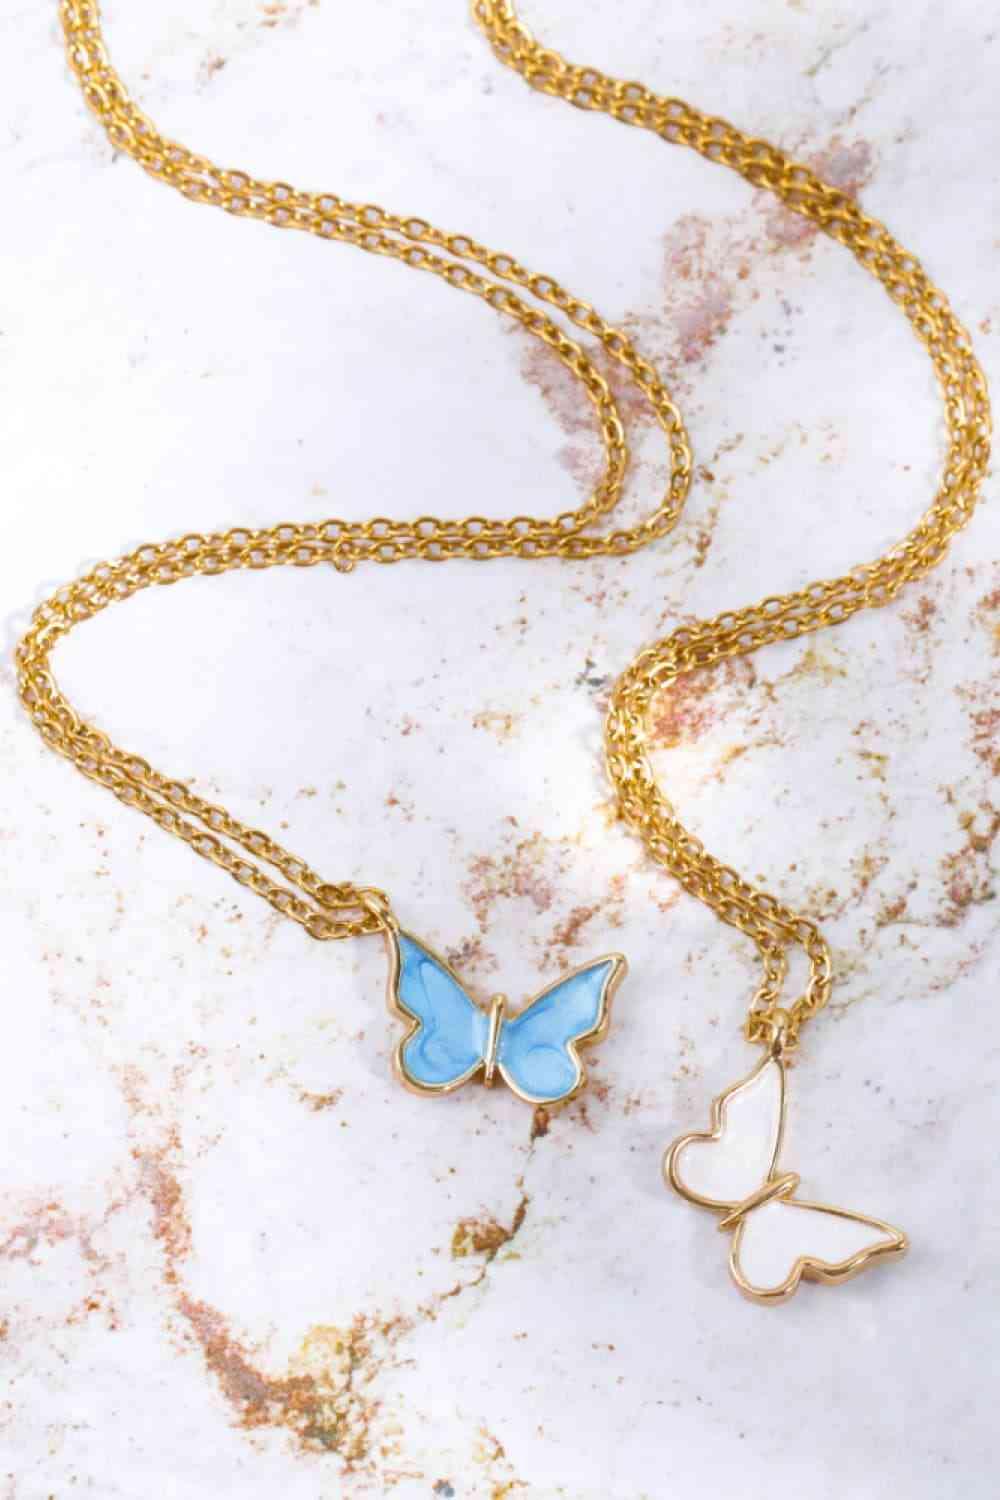 Butterfly Pendant Copper 14K Gold-Plated Necklace - God's Girl Gifts And Apparel